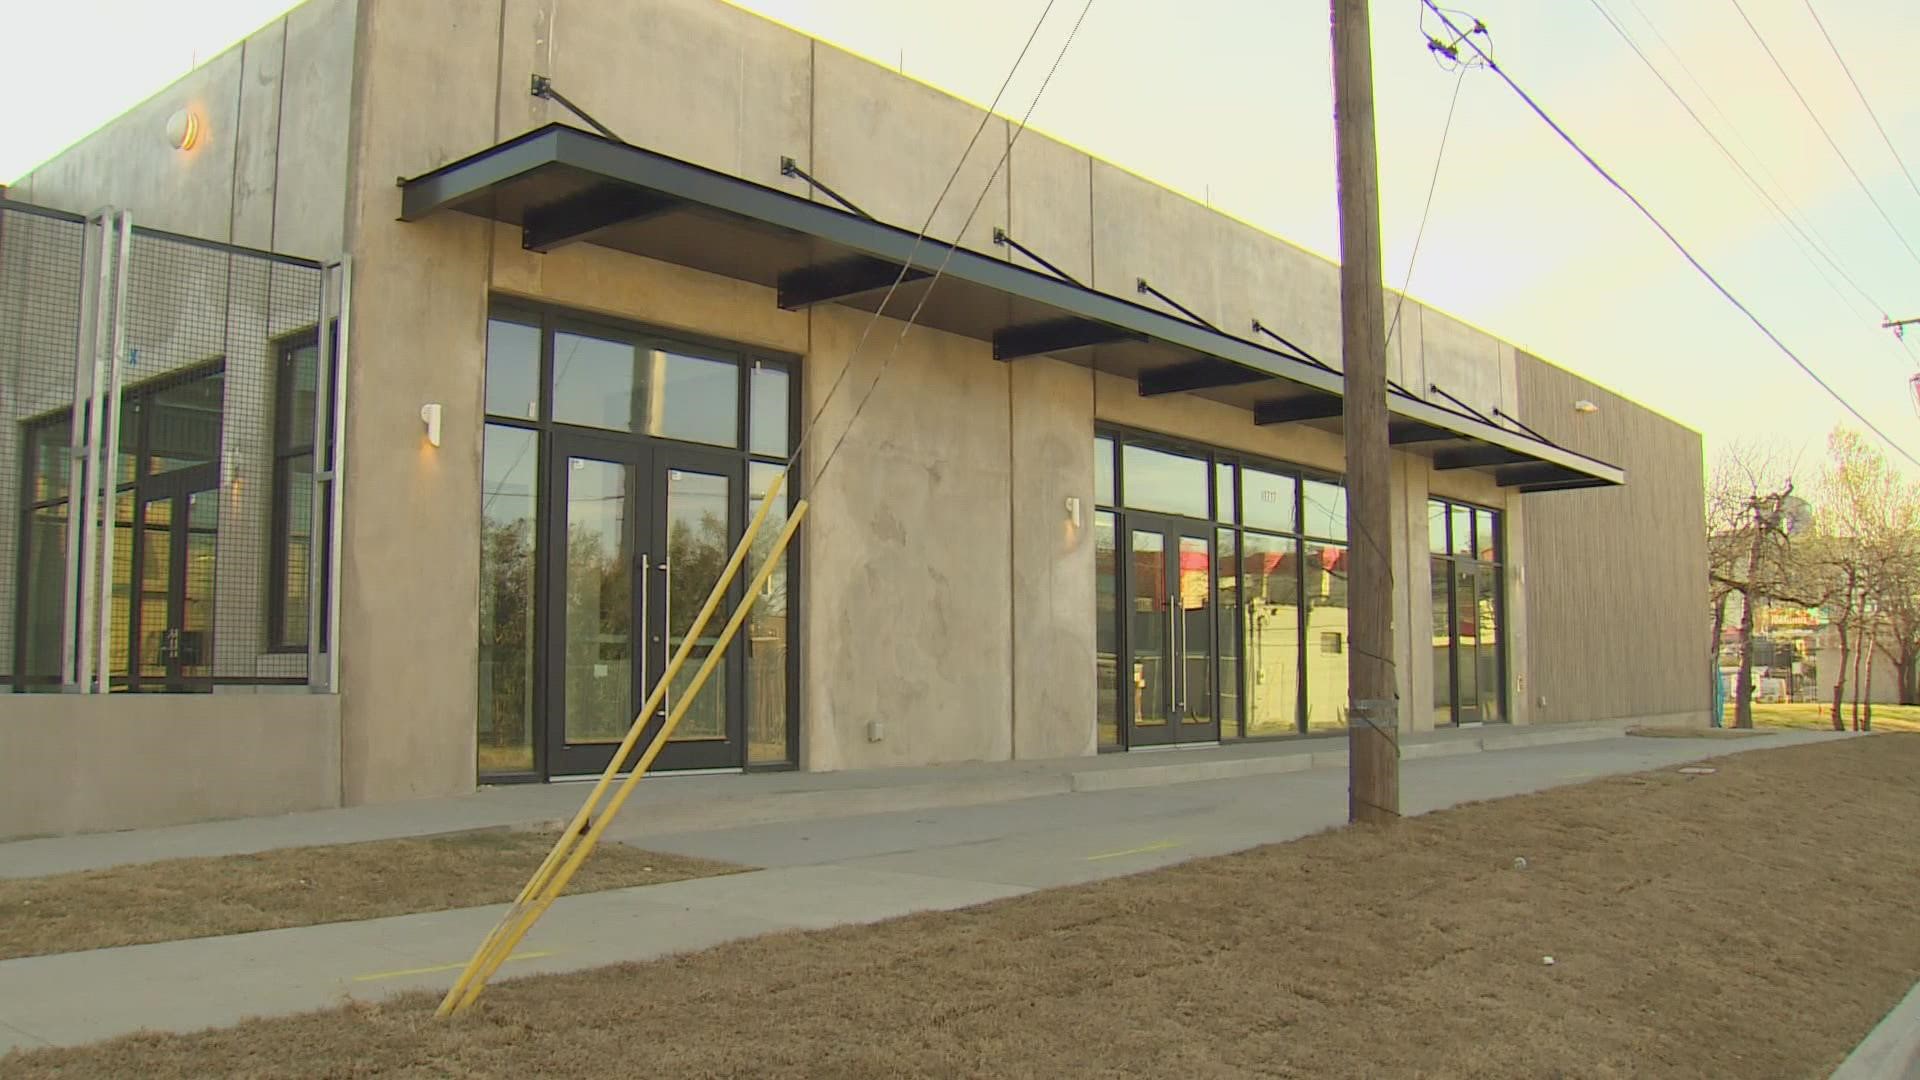 Austin Street Center says the new shelter will provide job training, counseling and health care needs.